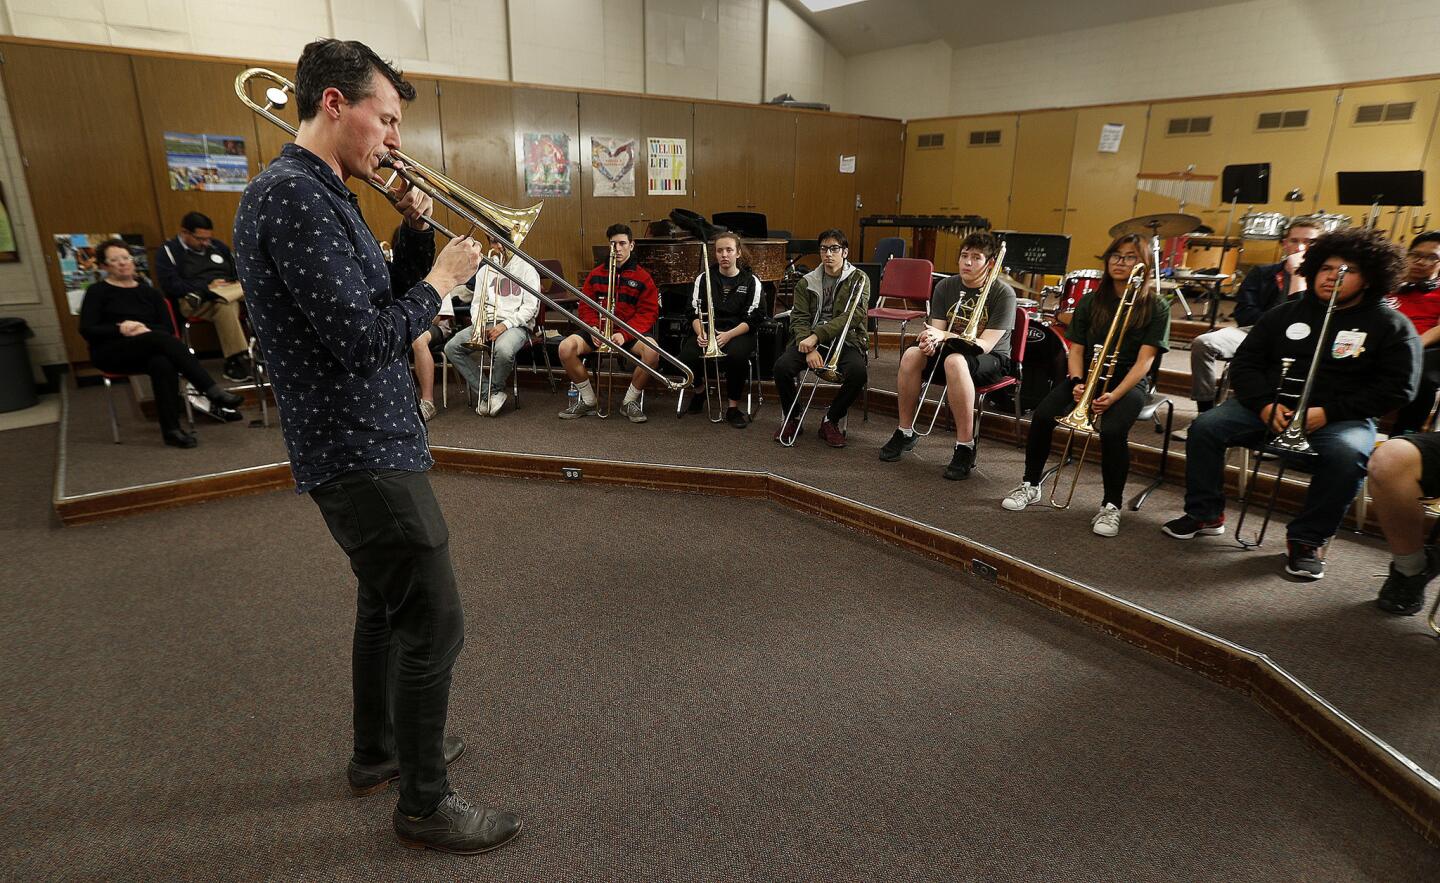 Jazz trombonist Nick Finzer plays his trombone for students in the music room at Glendale High School on Wednesday, March 13, 2019. Finzer, an instructor at the University of North Texas, worked with area trombonists, some which will come from GUS and local colleges, about some trombone techniques for warm up, and discovering jazz. Finzer is squeezing in his clinic amidst a national tour. Later that same evening, he will be performing at the Blue Whale Bar in Los Angeles.